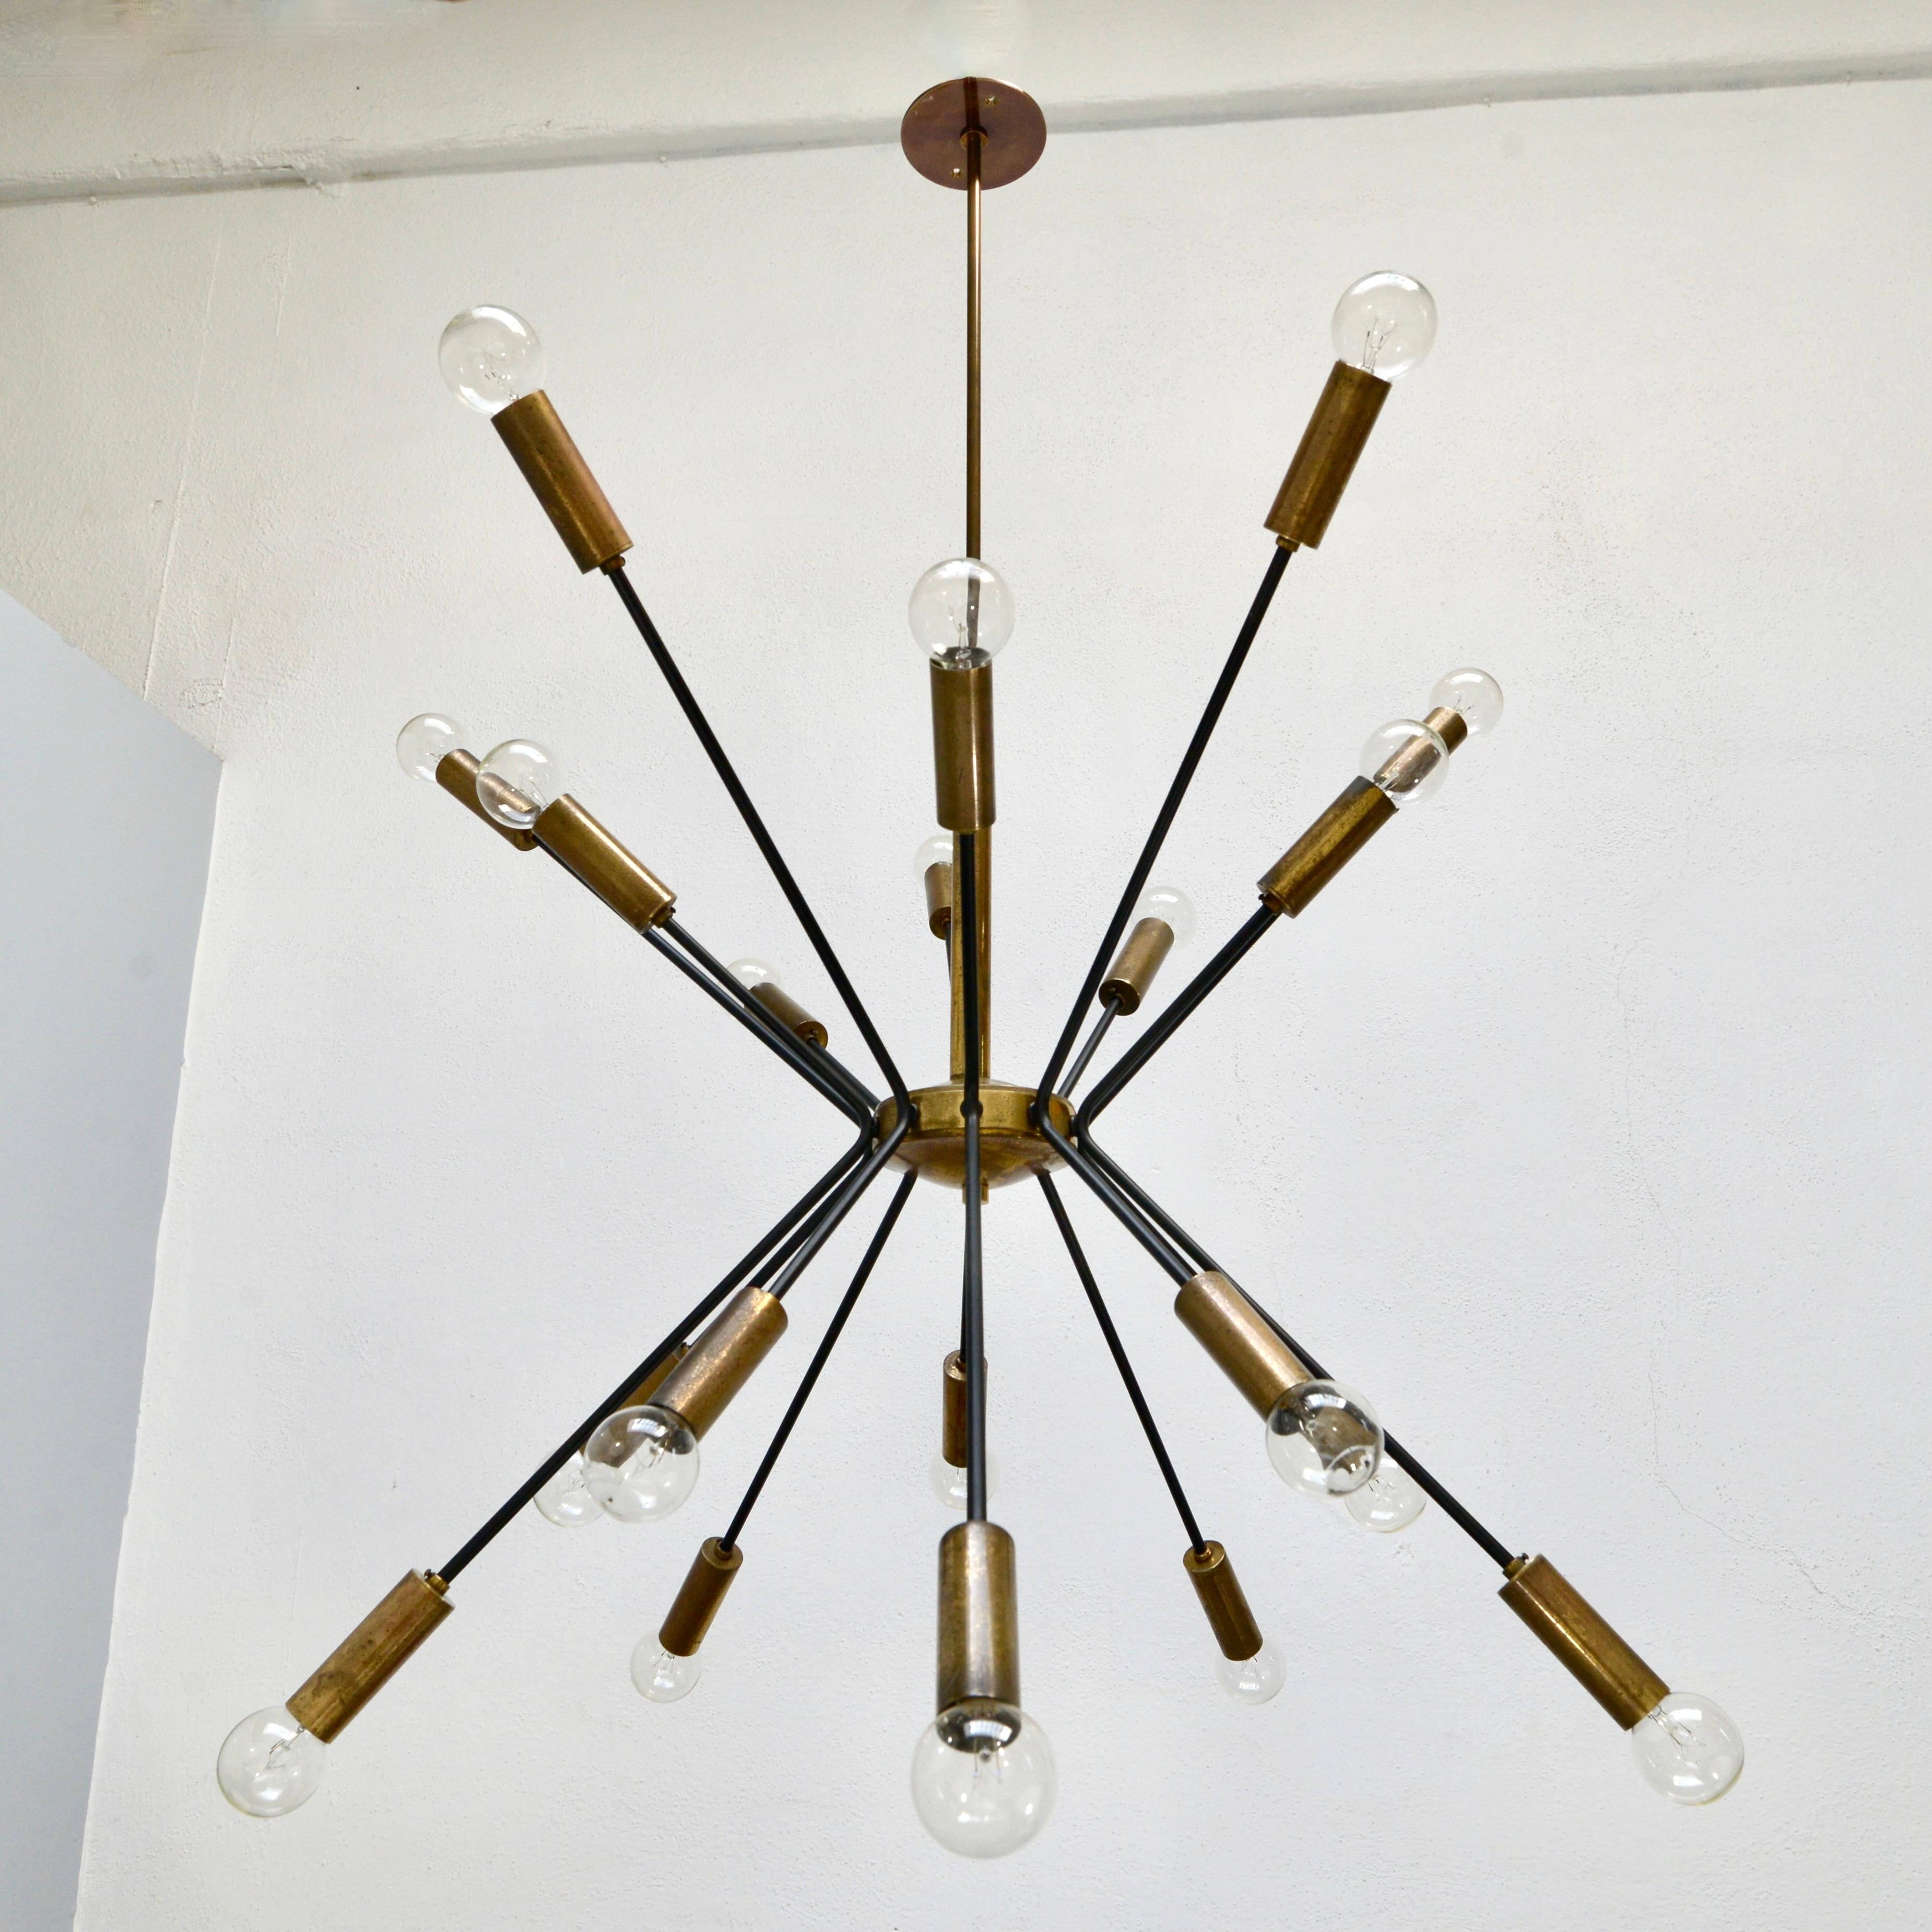 A stunning 1950s chandelier from Italy attributed to Stilnovo, with original brass and painted aluminum finish.  Partially restored and rewired with 20 E12 candelabra based sockets. for use in the US. Light bulbs included with order.